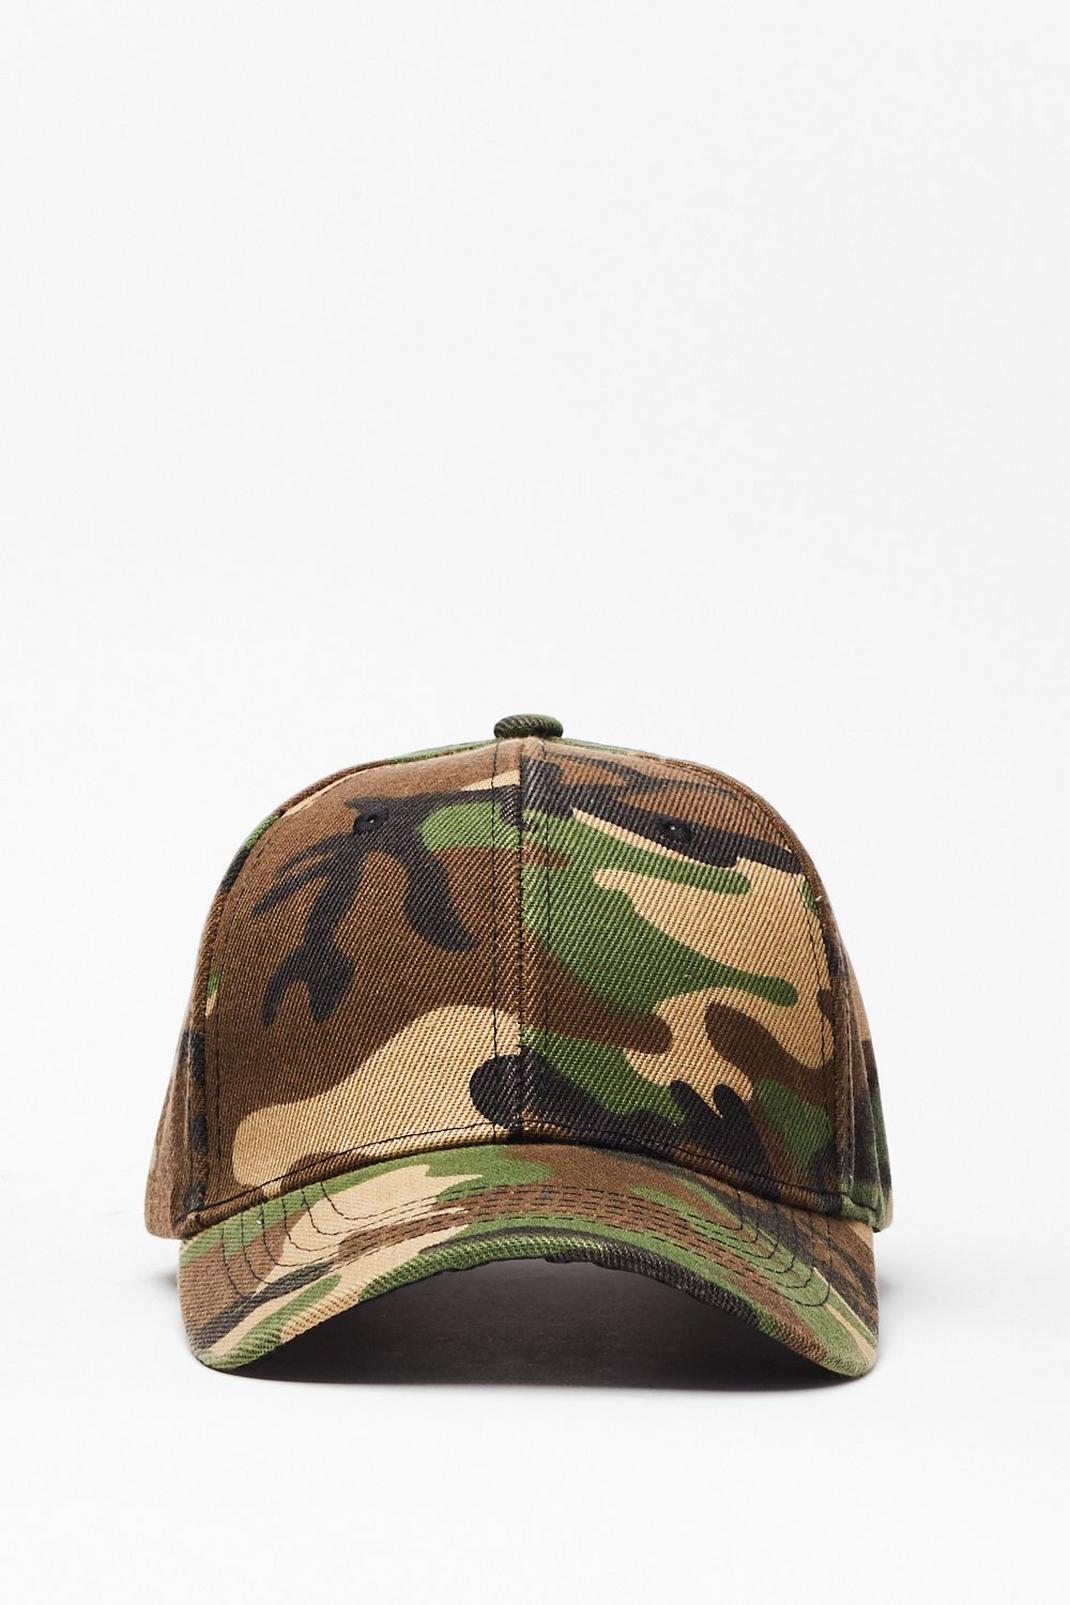 We're Incognito Camo Baseball Cap image number 1